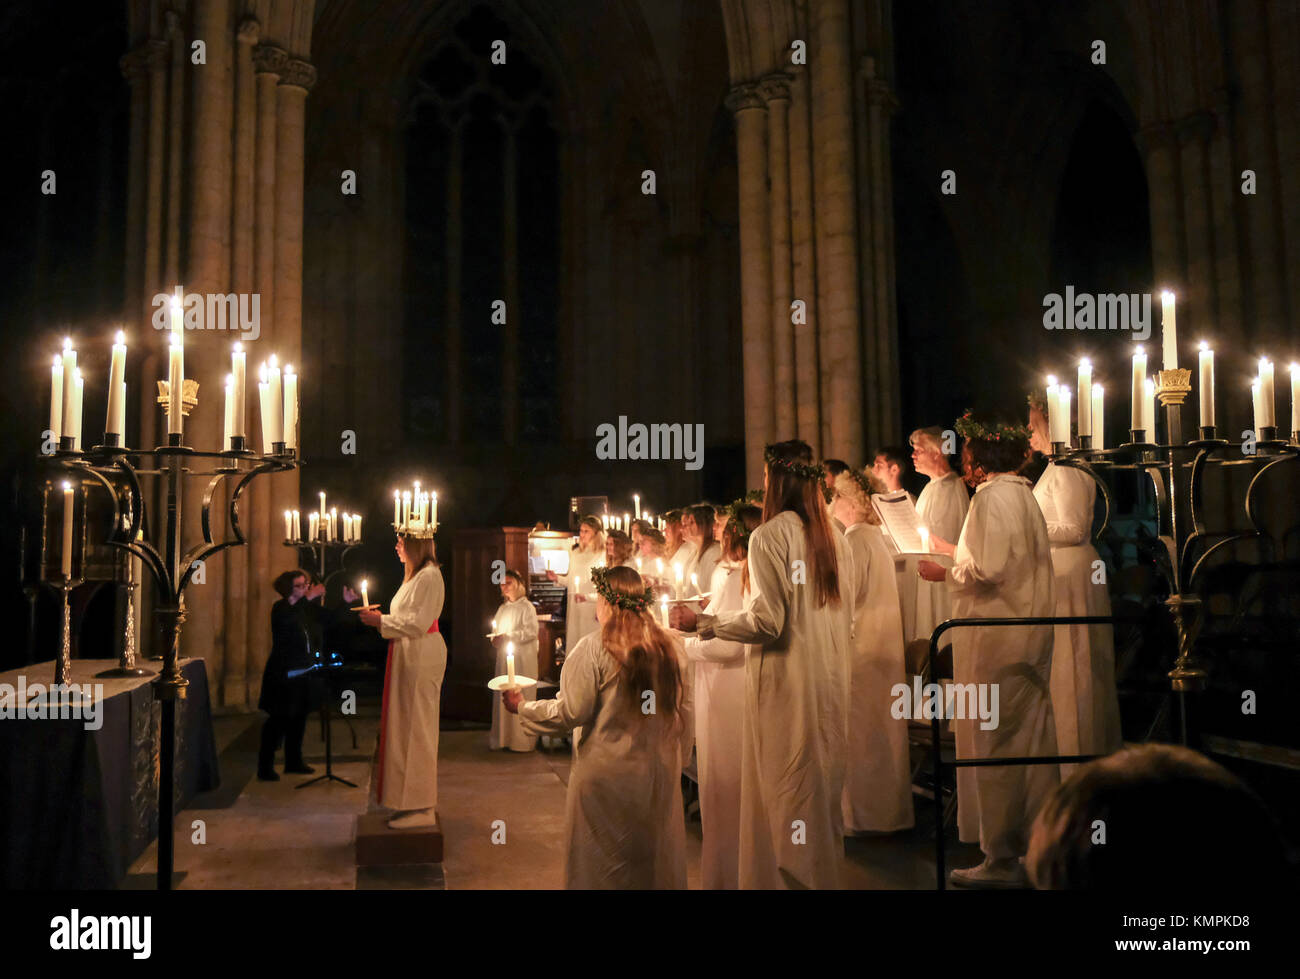 York, UK. 8th December, 2017. Linnea Hennersten from Uppsala, Sweden, together with the London Nordic Choir, performs the role of Lucia in this year's candlelit Sankta Lucia festival at York Minster. Credit - Alternative Occasions Photography/Alamy Live News Stock Photo